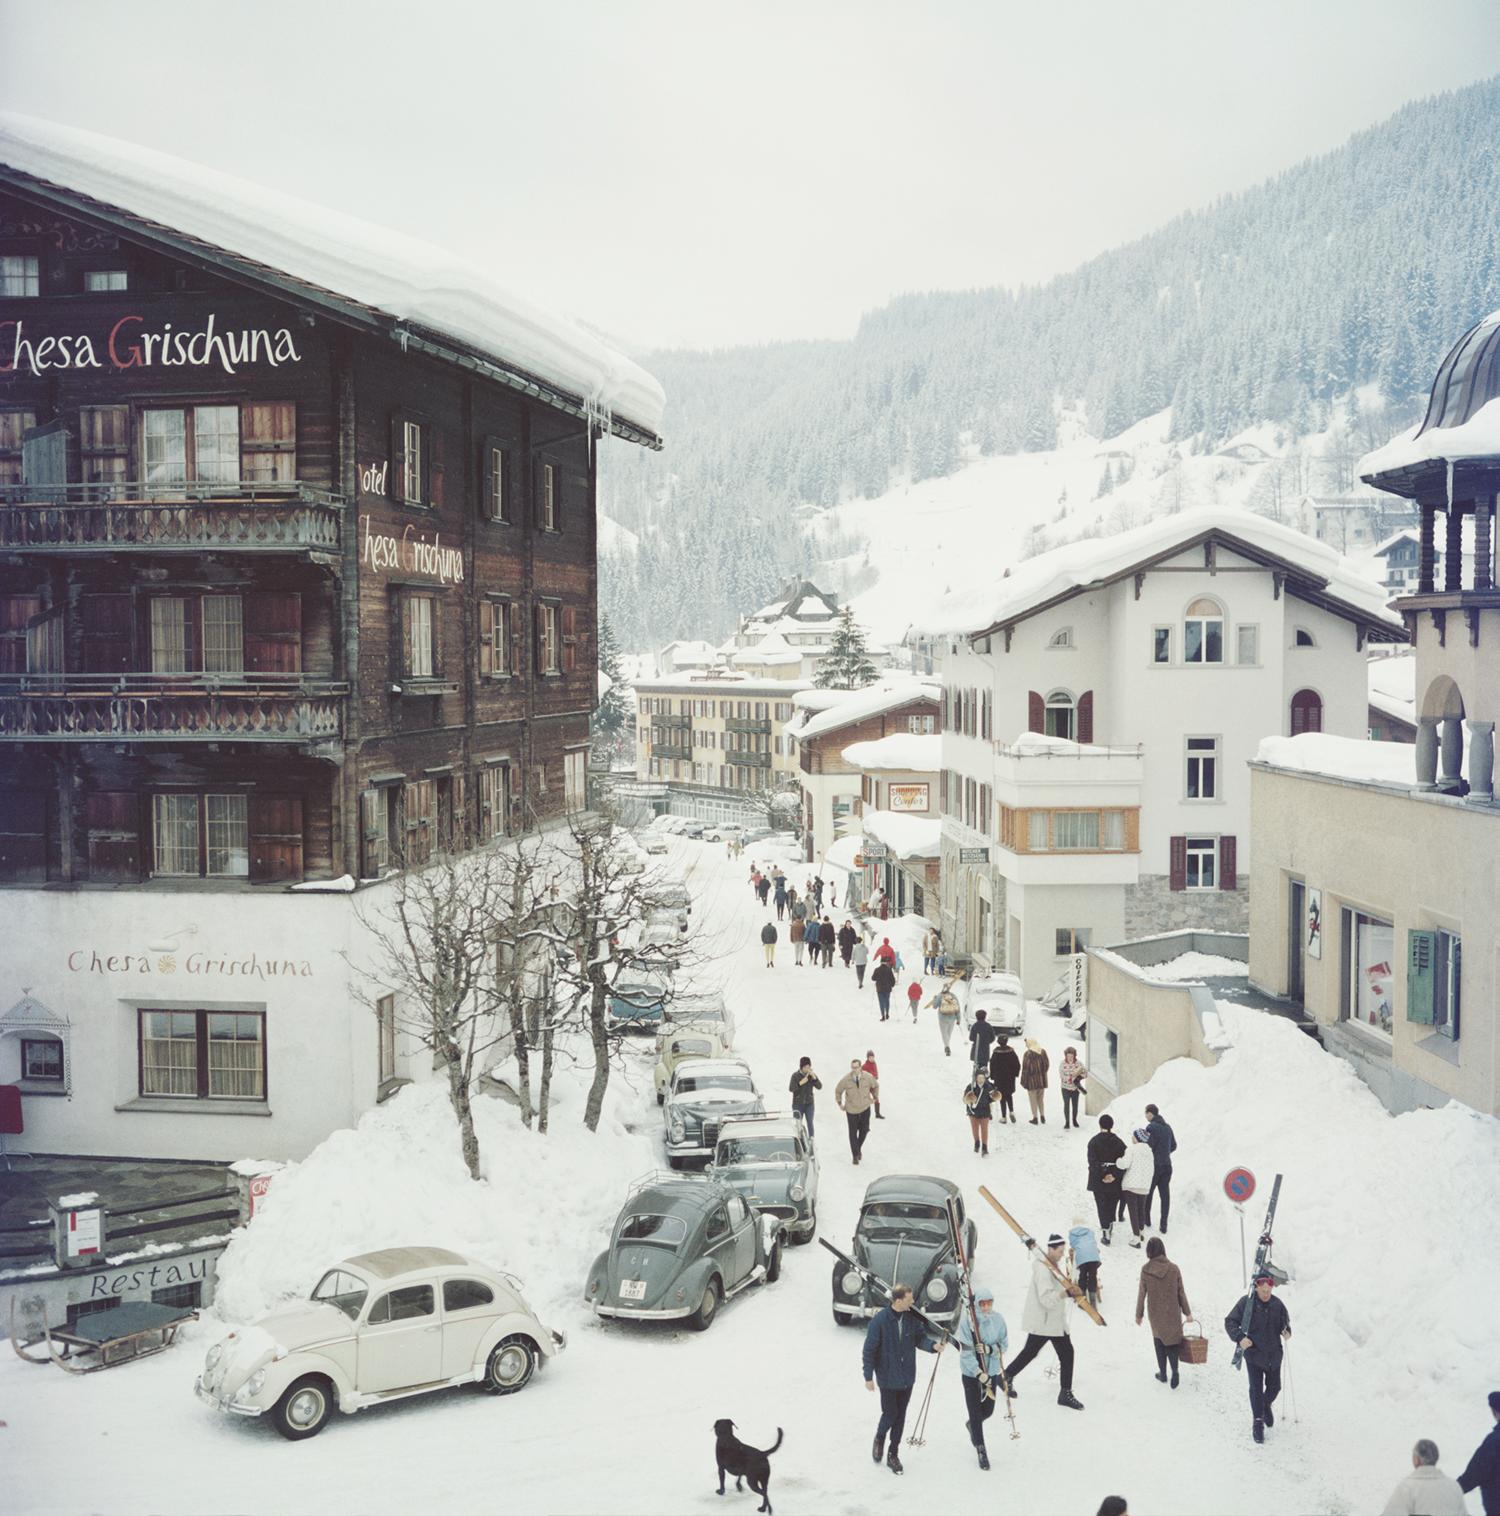 Klosters by Slim Aarons

Skiers pass by the Hotel Chesa Grischuna in Klosters, 1963.

Skiers walk past the hotel and along the snow covered road carrying skis on their shoulders. The road is lined with classic and vintage cars of the era and